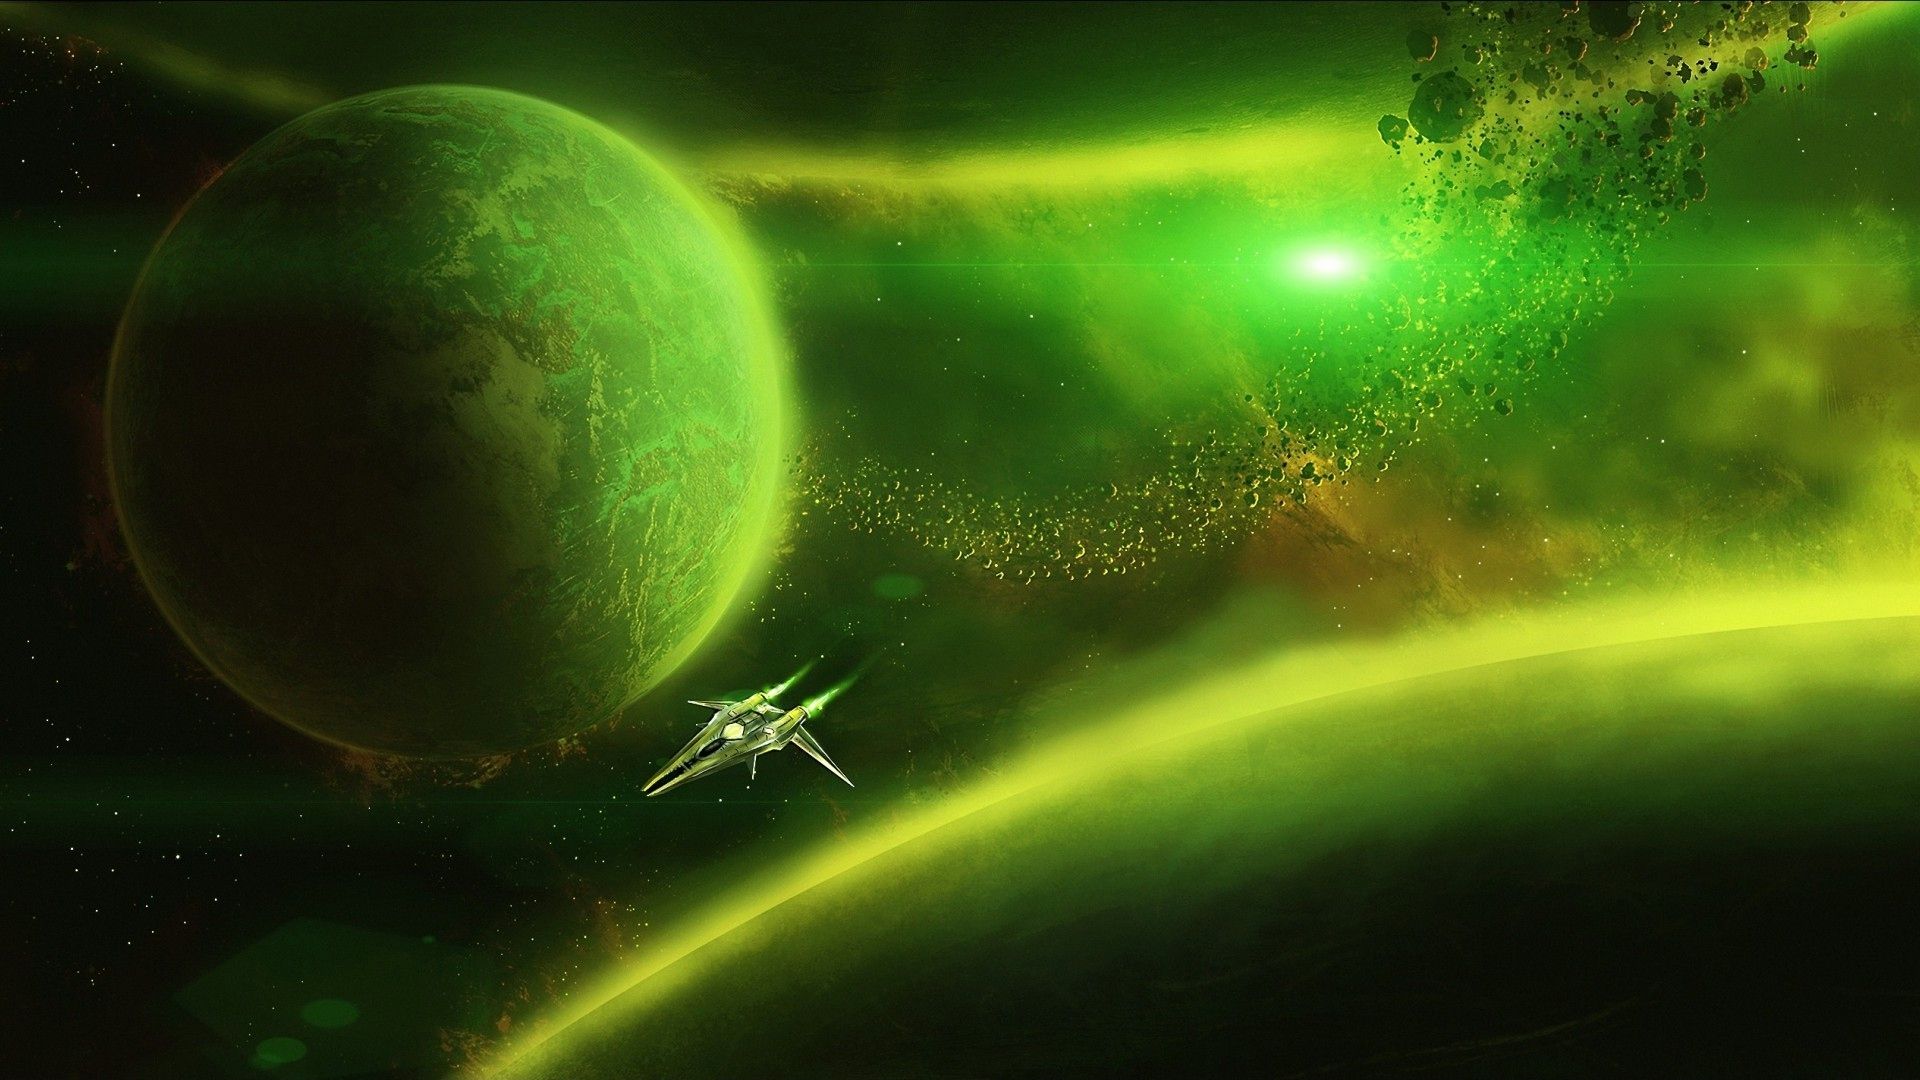 Green Space Wallpaper New Digital Art Universe Space Planet Stars Spaceship Meteors Lights Green Wallpaper HD This Month of The Hudson